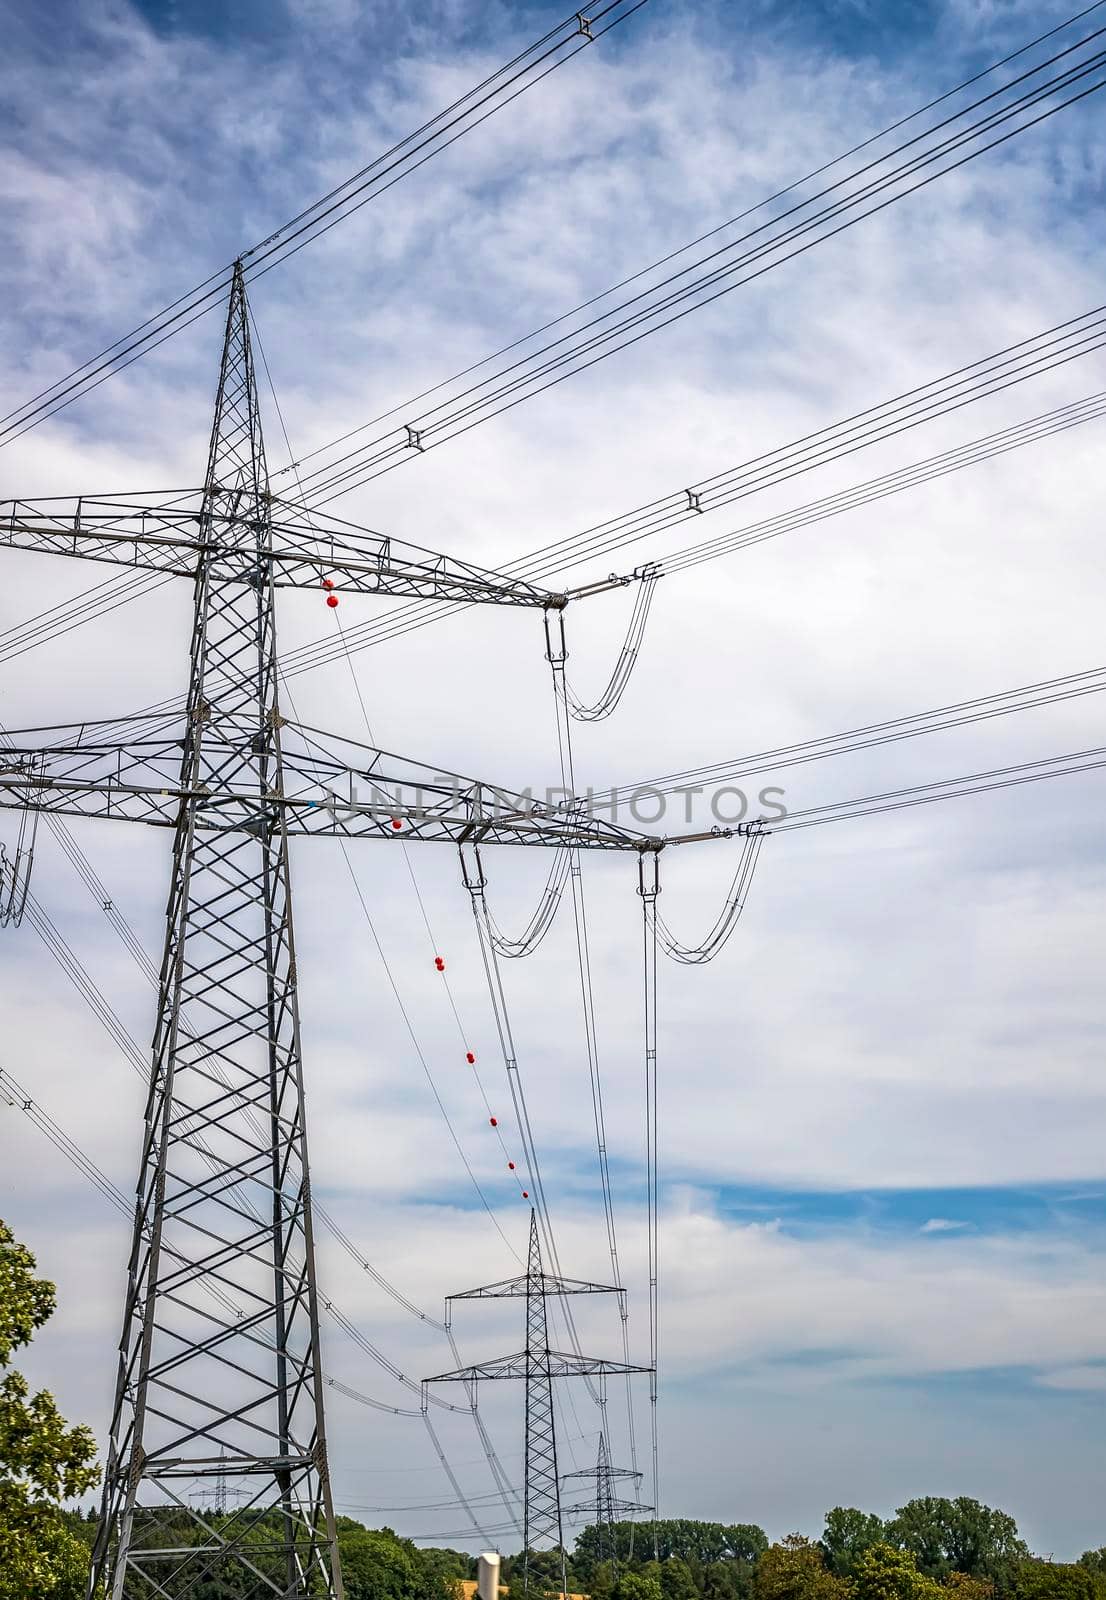 High voltage electric pole and transmission lines. Electricity pylons. Power and energy engineering system. Cable wire on an electric post.  by EdVal